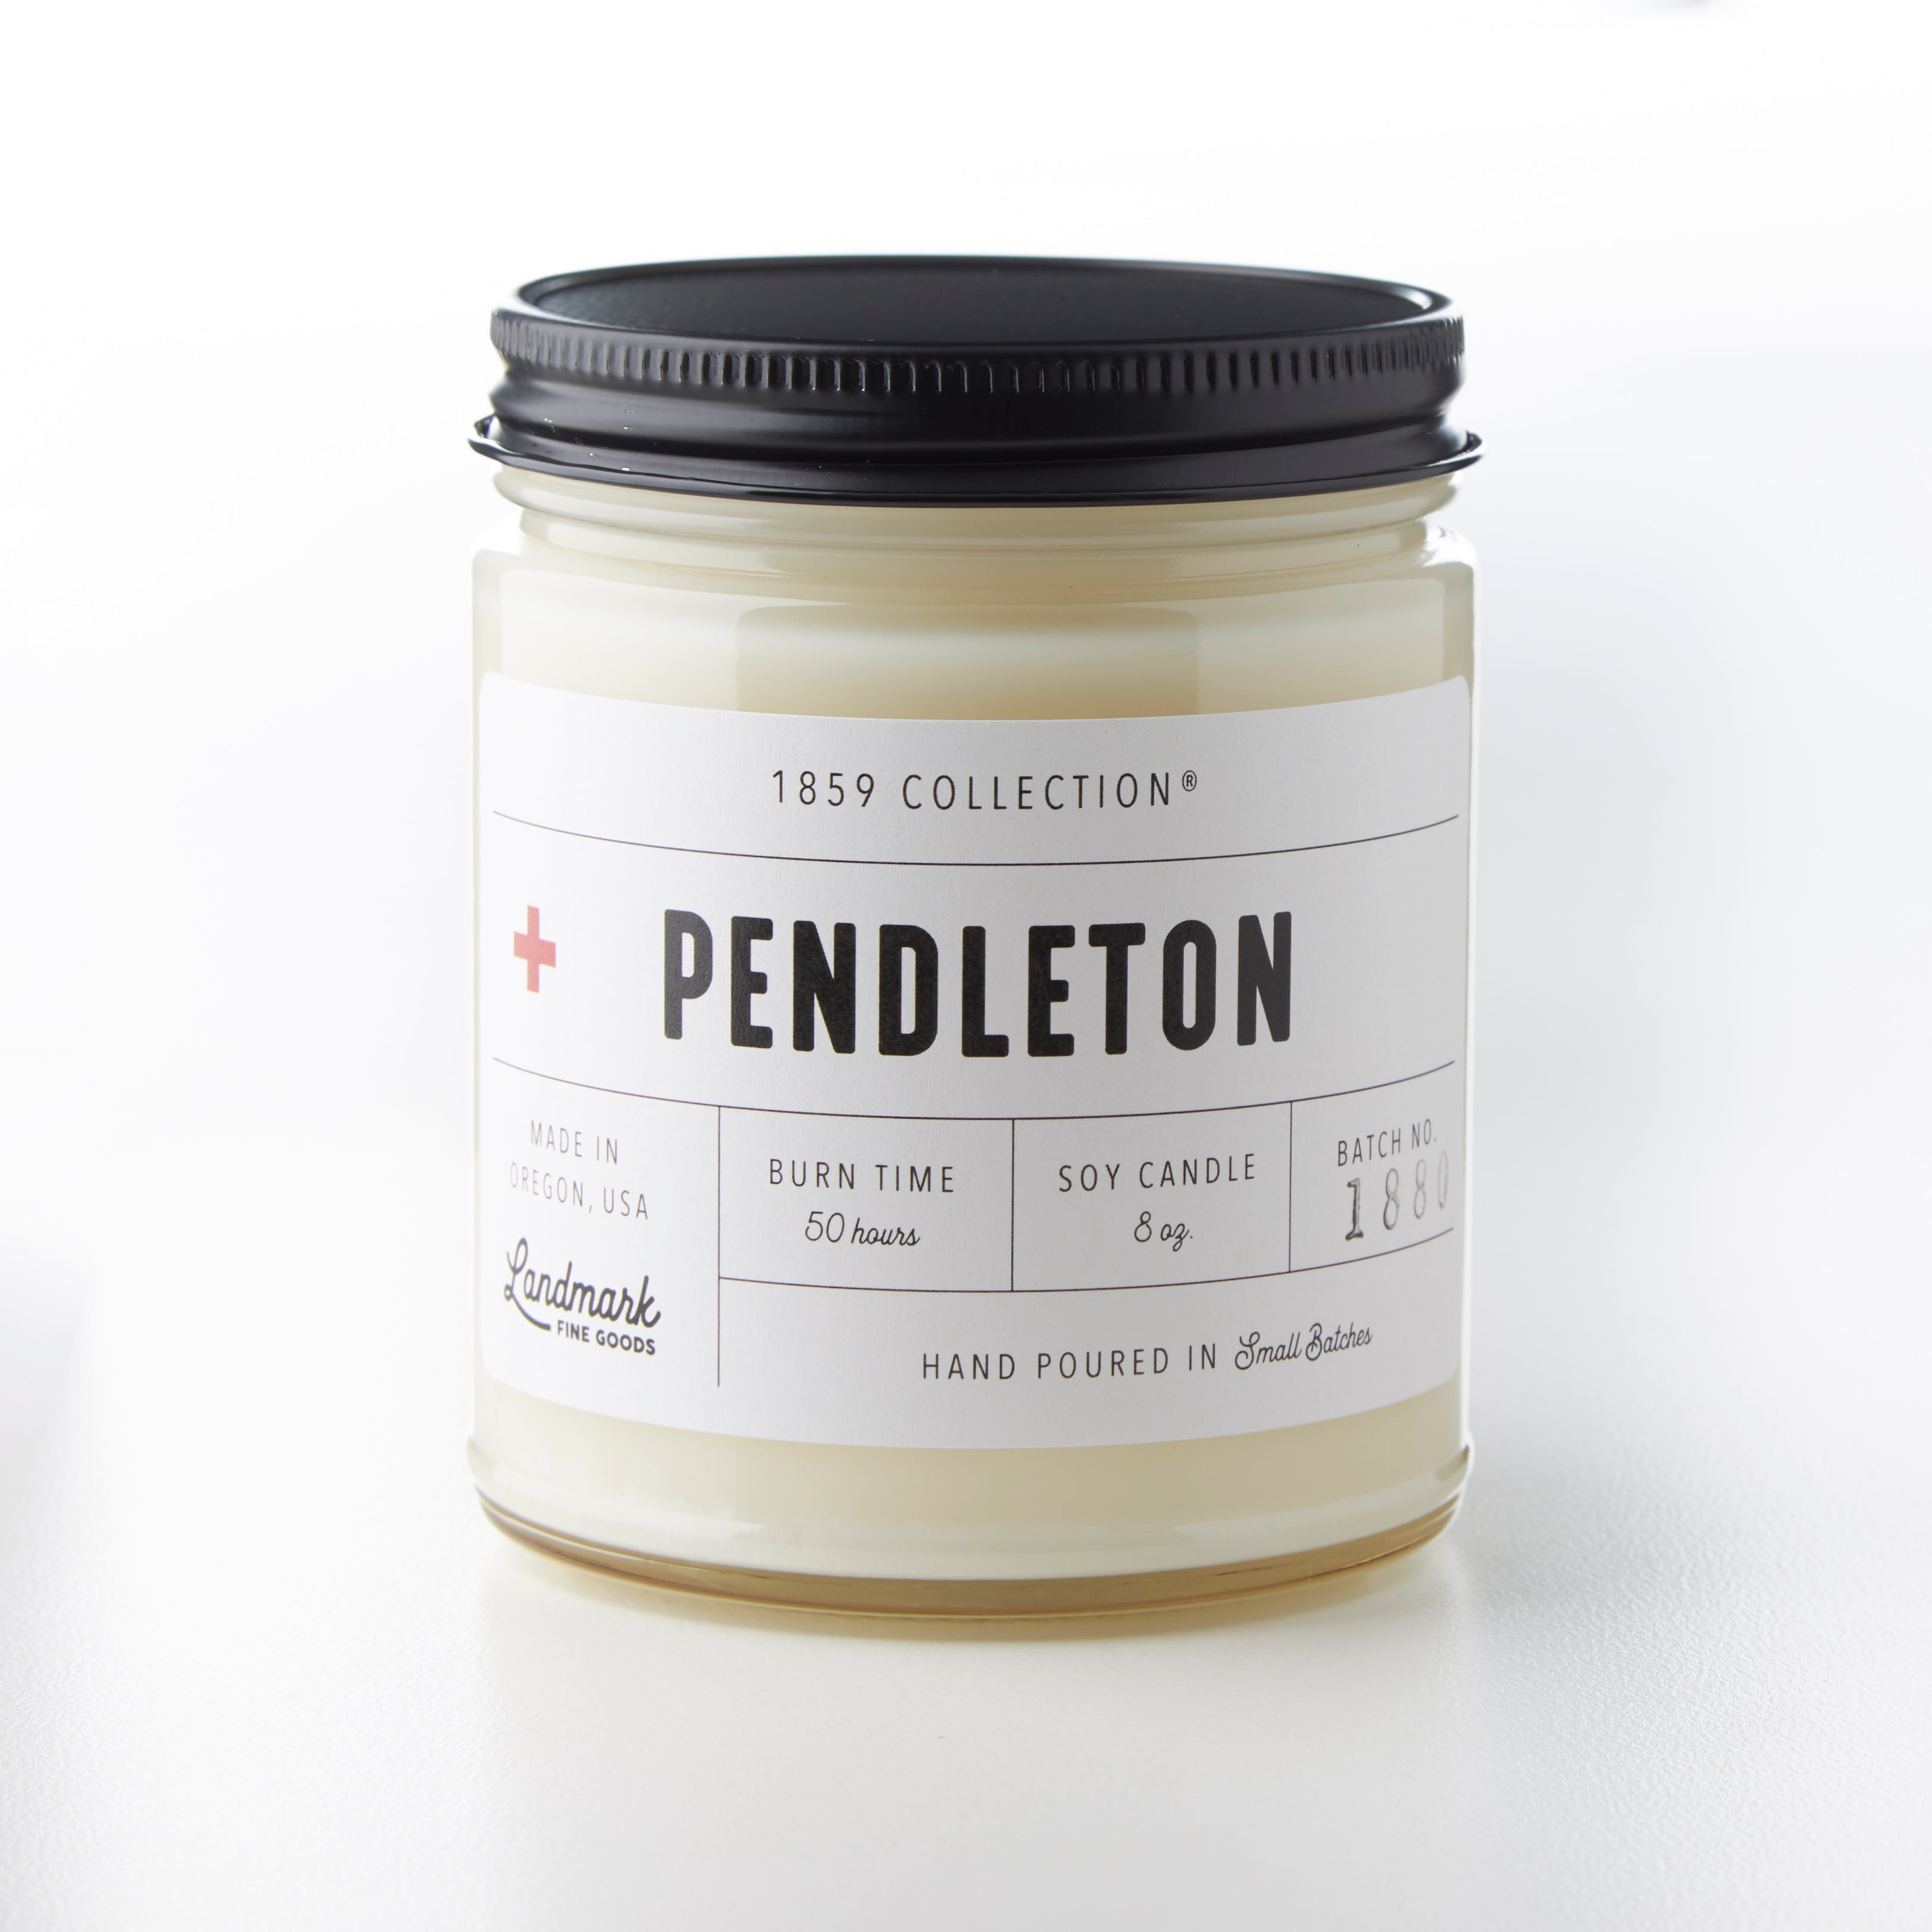 Pendleton Candle - 1859 Collection®